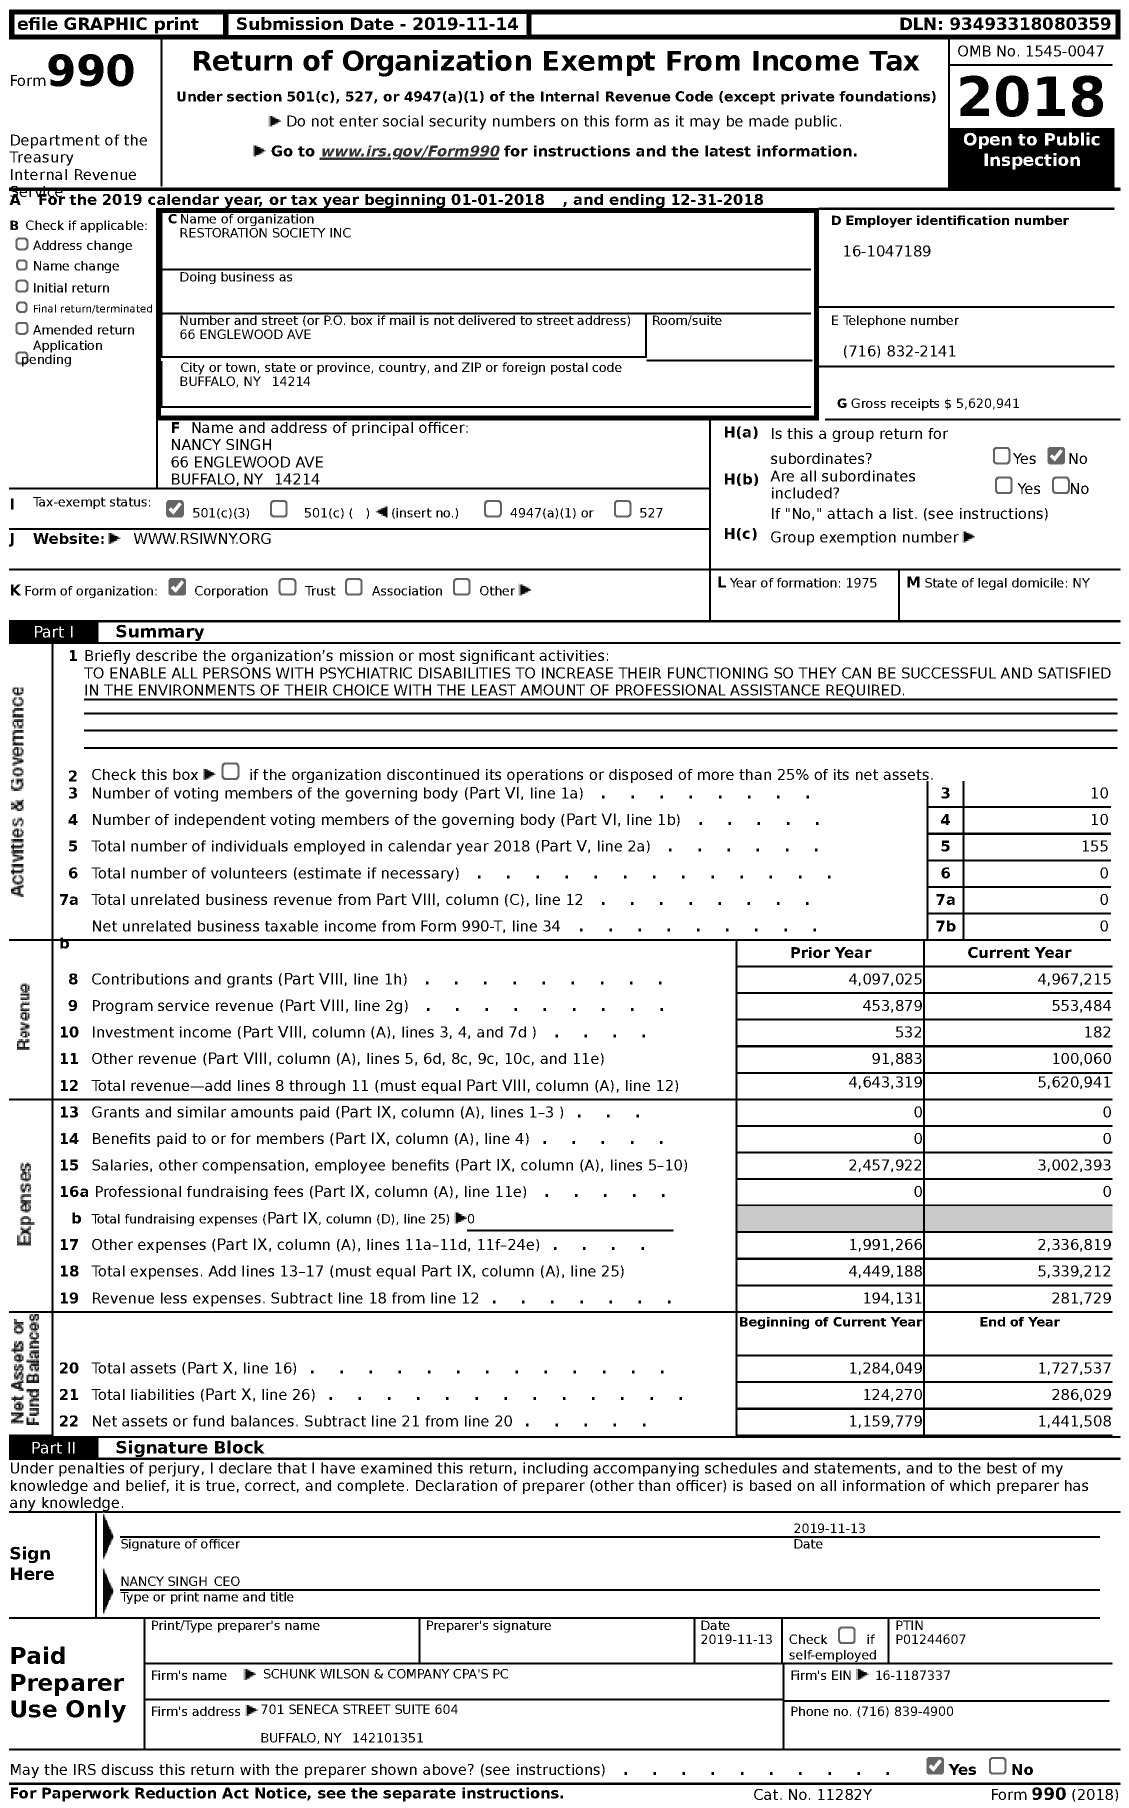 Image of first page of 2018 Form 990 for Restoration Society Incorporated (RSI)